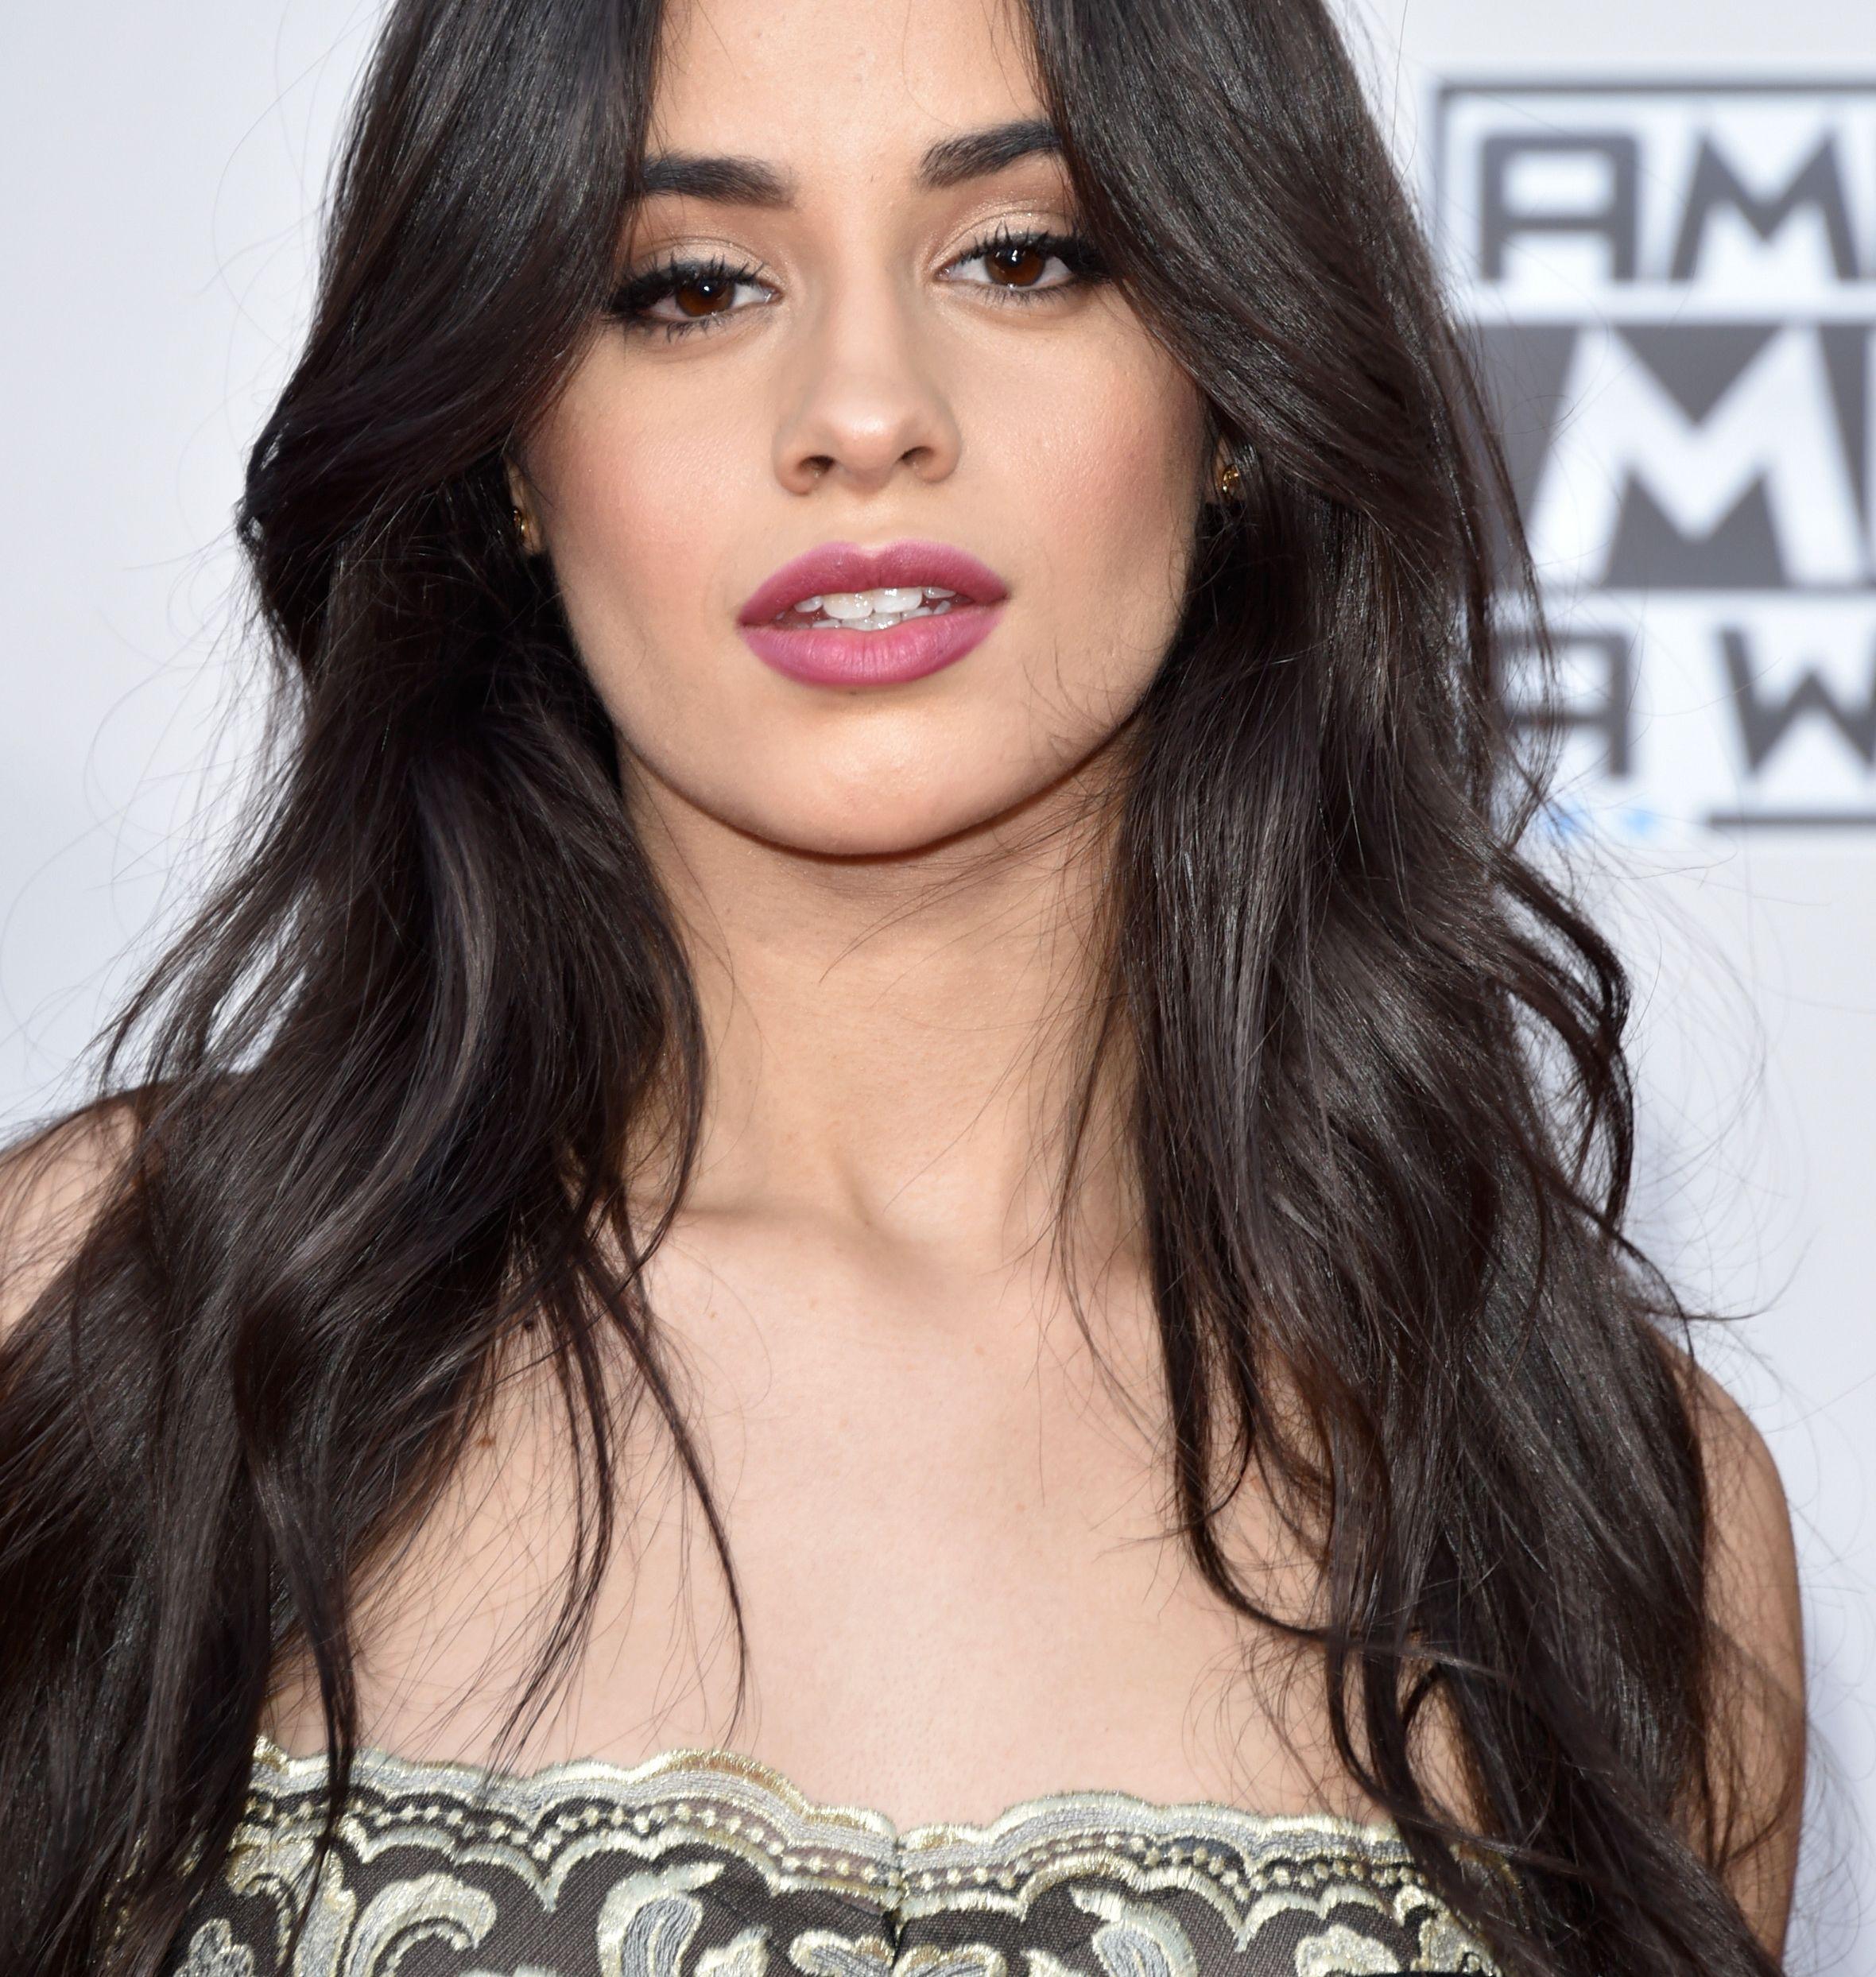 A Complete Timeline of Camila Cabello's Most Scandalous Moments